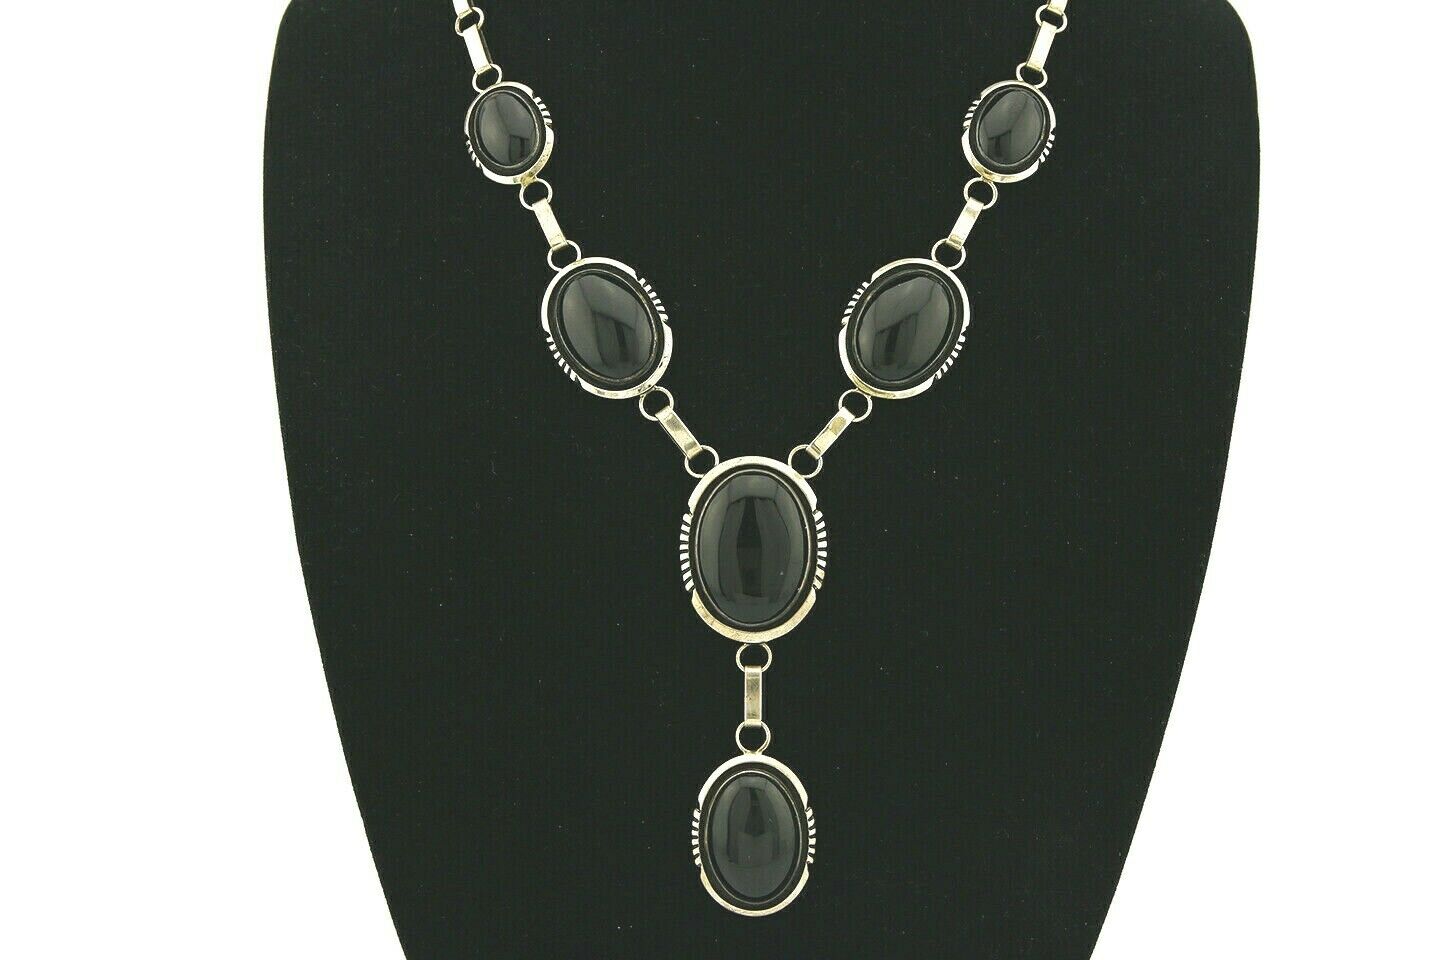 Women's Navajo Necklace Onyx .925 Silver Signed Denetdale